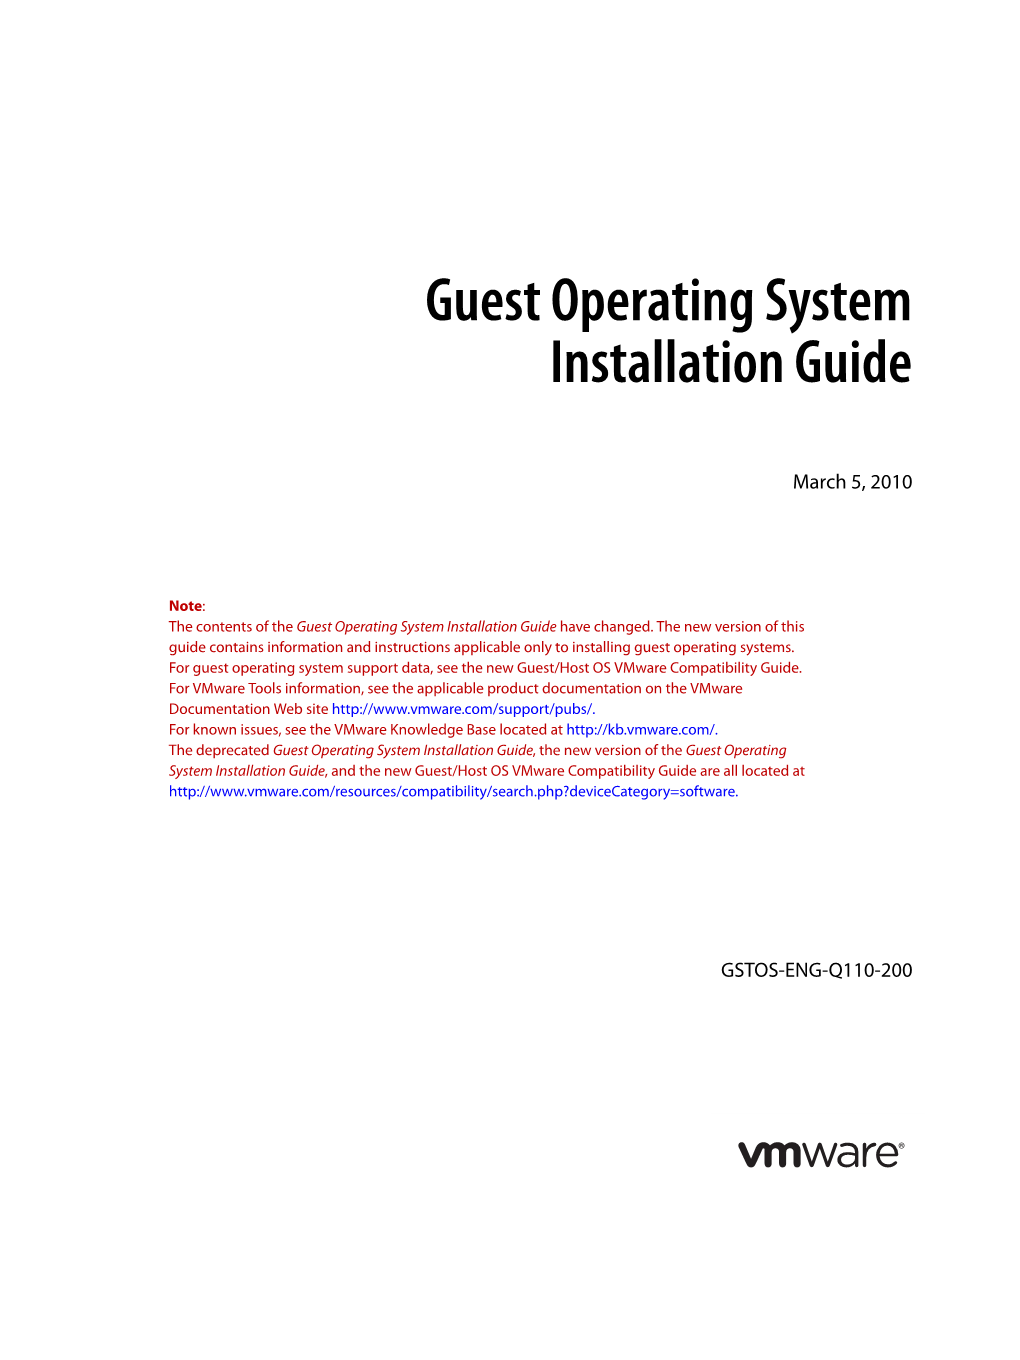 Guest Operating System Installation Guide